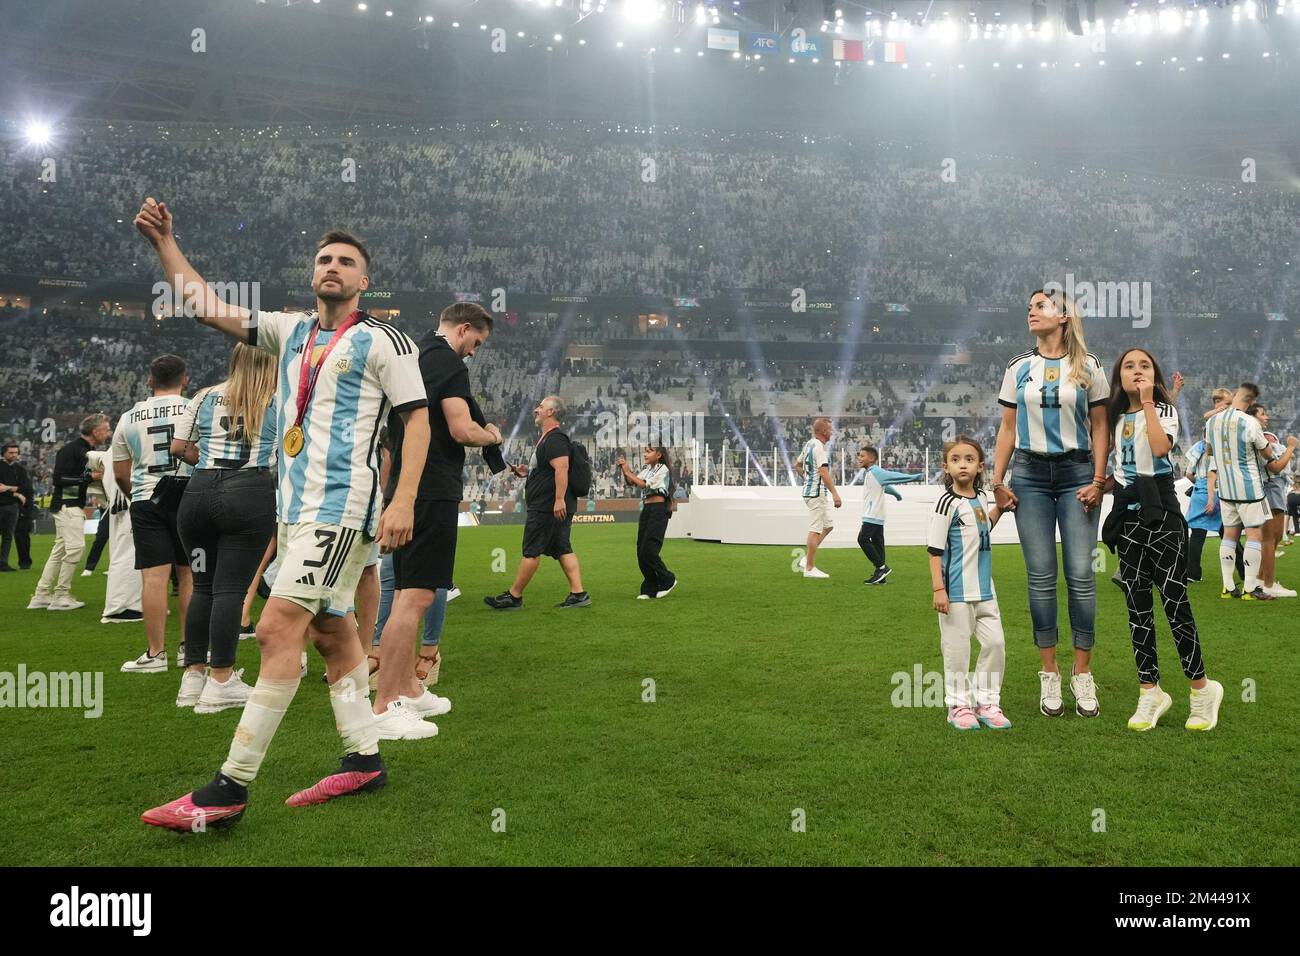 Lusail, Qatar. 18/12/2022, Nicolas Tagliafico of Argentina during the FIFA World Cup Qatar 2022 match, Final, between Argentina and France played at Lusail Stadium on Dec 18, 2022 in Lusail, Qatar. (Photo by Bagu Blanco / PRESSIN) Stock Photo